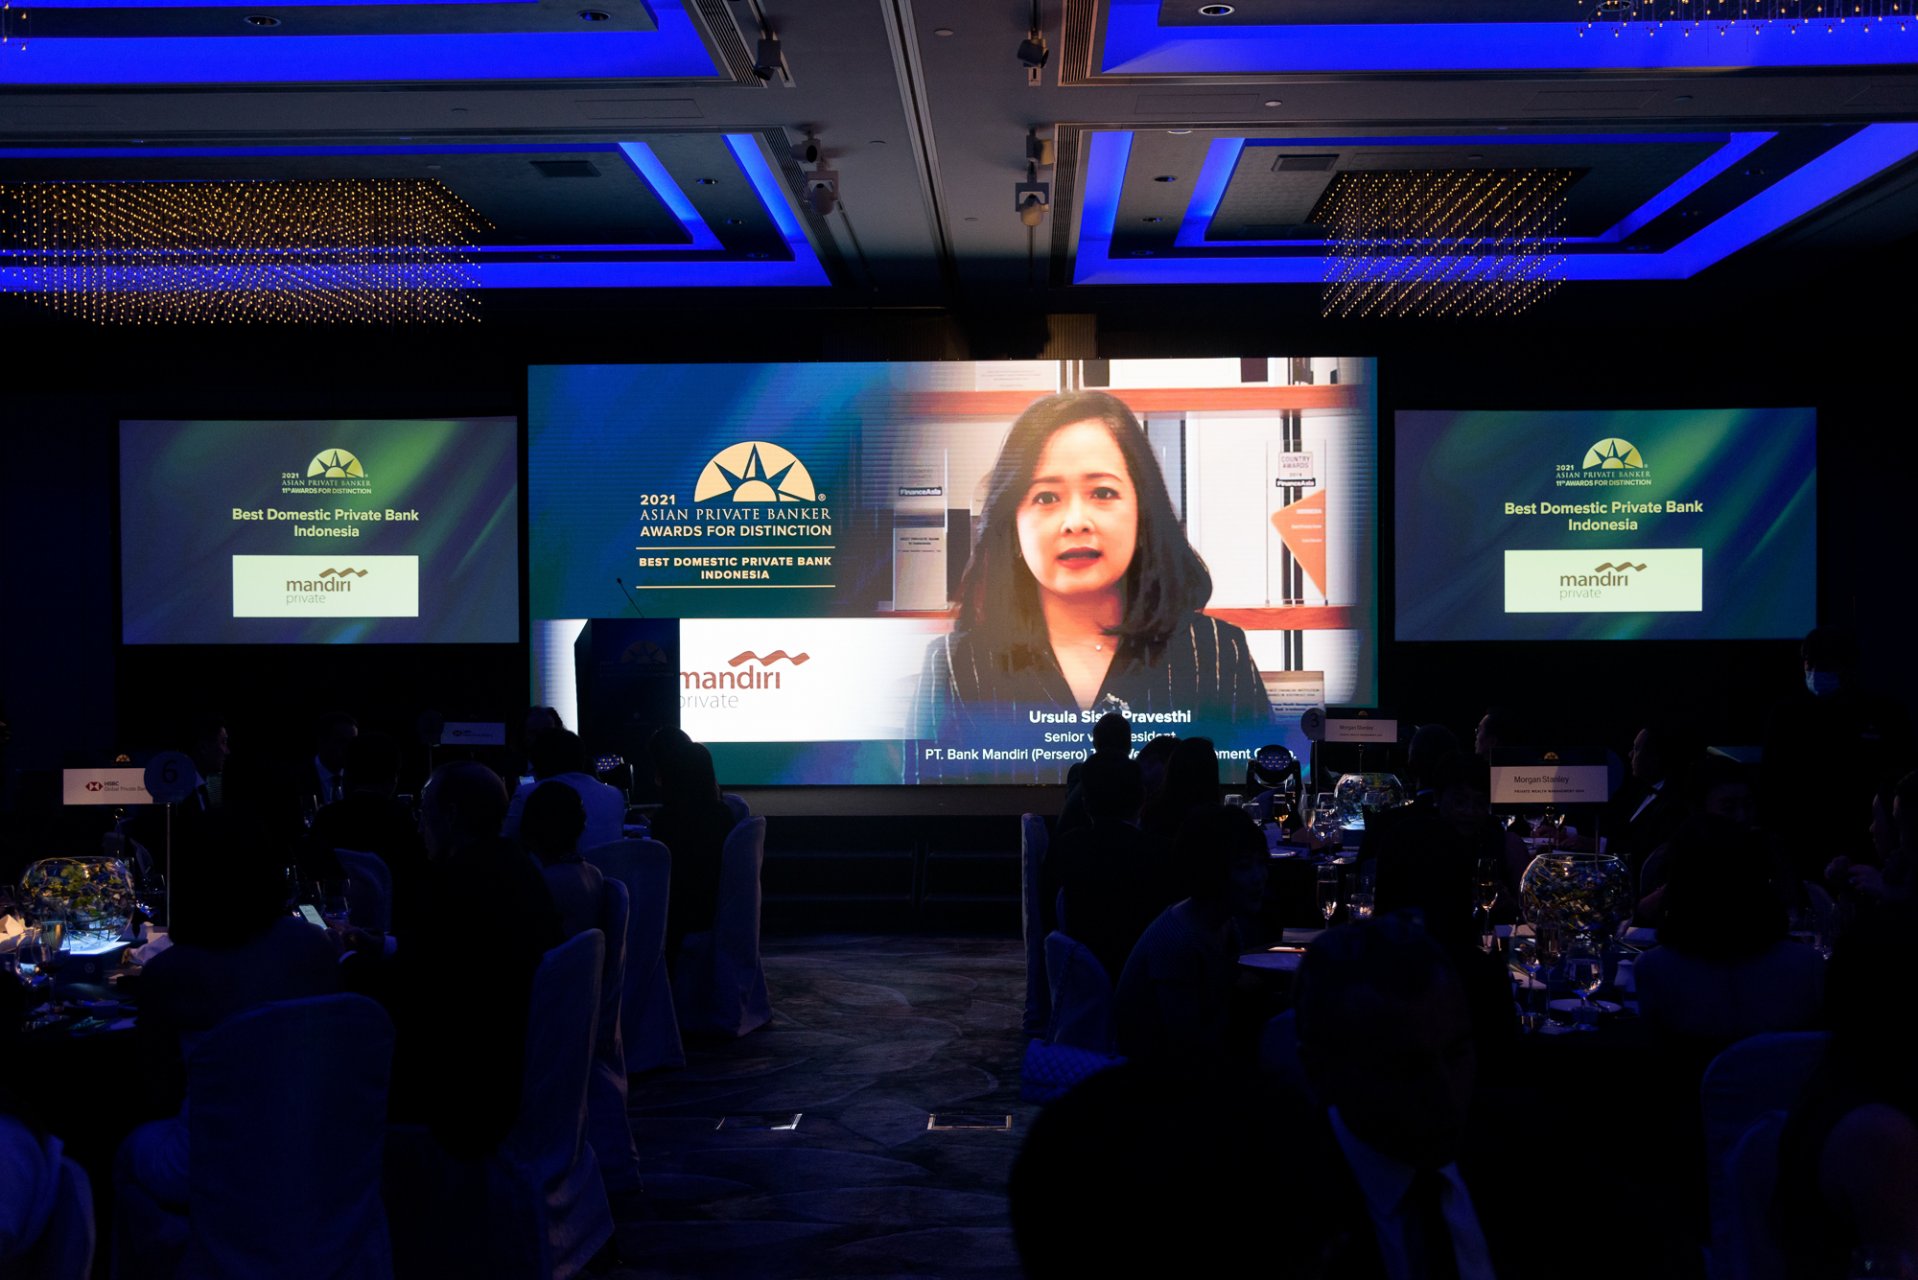 Ursula Sista Pravesthi of PT. Bank Mandiri (Persero) Tbk Wealth Management Group says a few words on their win as Best Domestic Private Bank – Indonesia for 2021